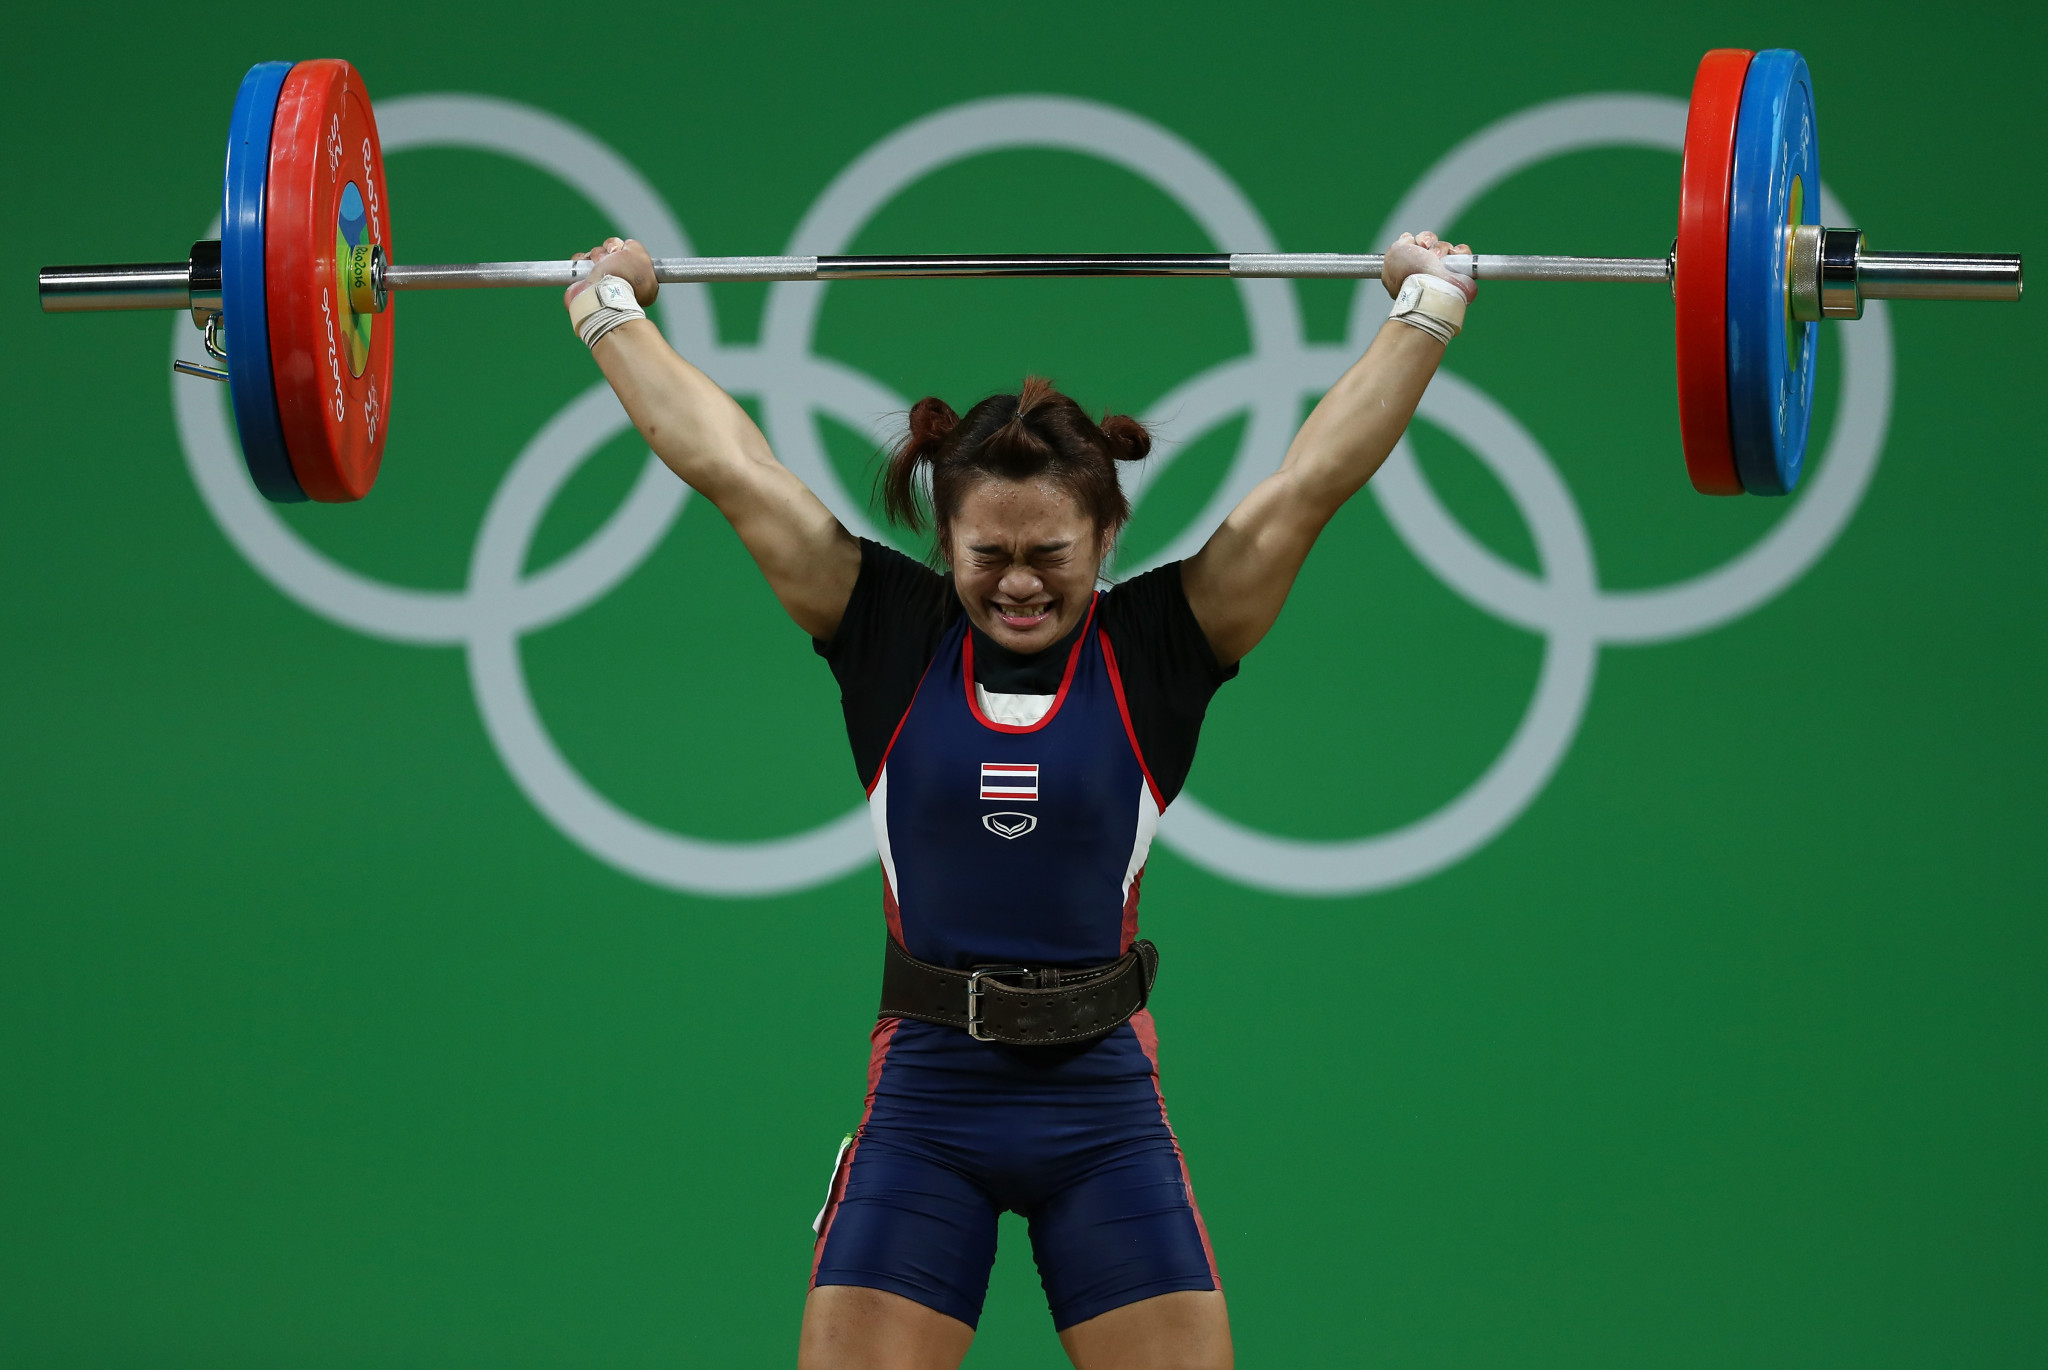 Rio 2016 Olympic gold medallist Sukanya Srisurat was among the nine members of Thailand's team who tested positive at last year’s IWF World Championships in Turkmenistan's capital Ashgabat ©Getty Images